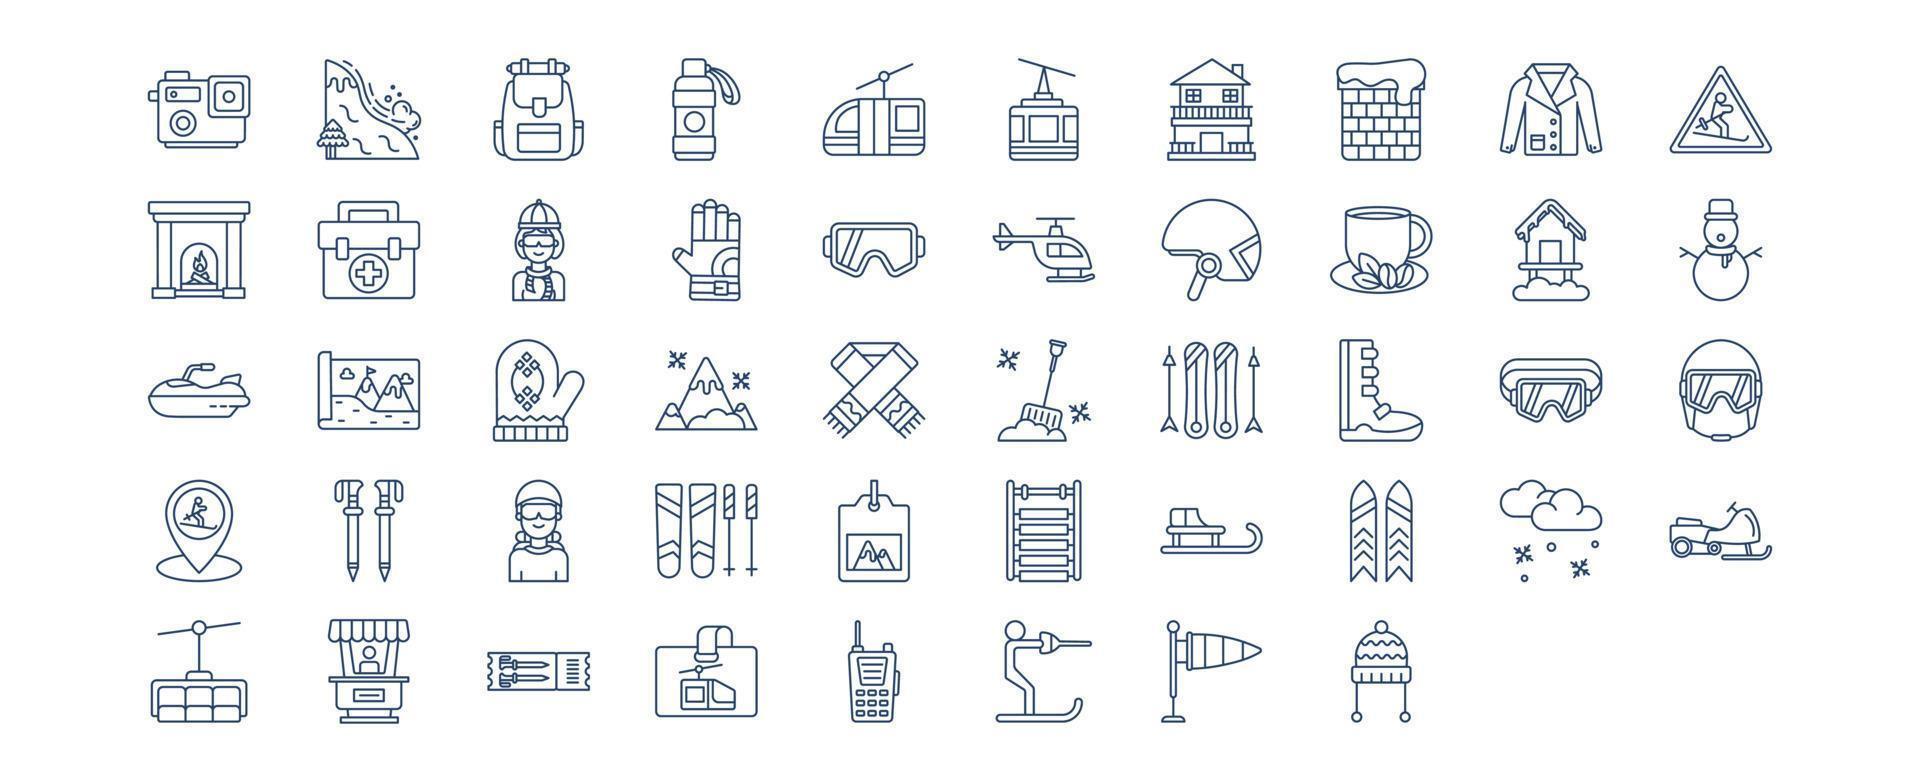 Collection of icons related to Ski Resort, including icons like Action Camera, Avalanche, Cabin, Chalet and more. vector illustrations, Pixel Perfect set